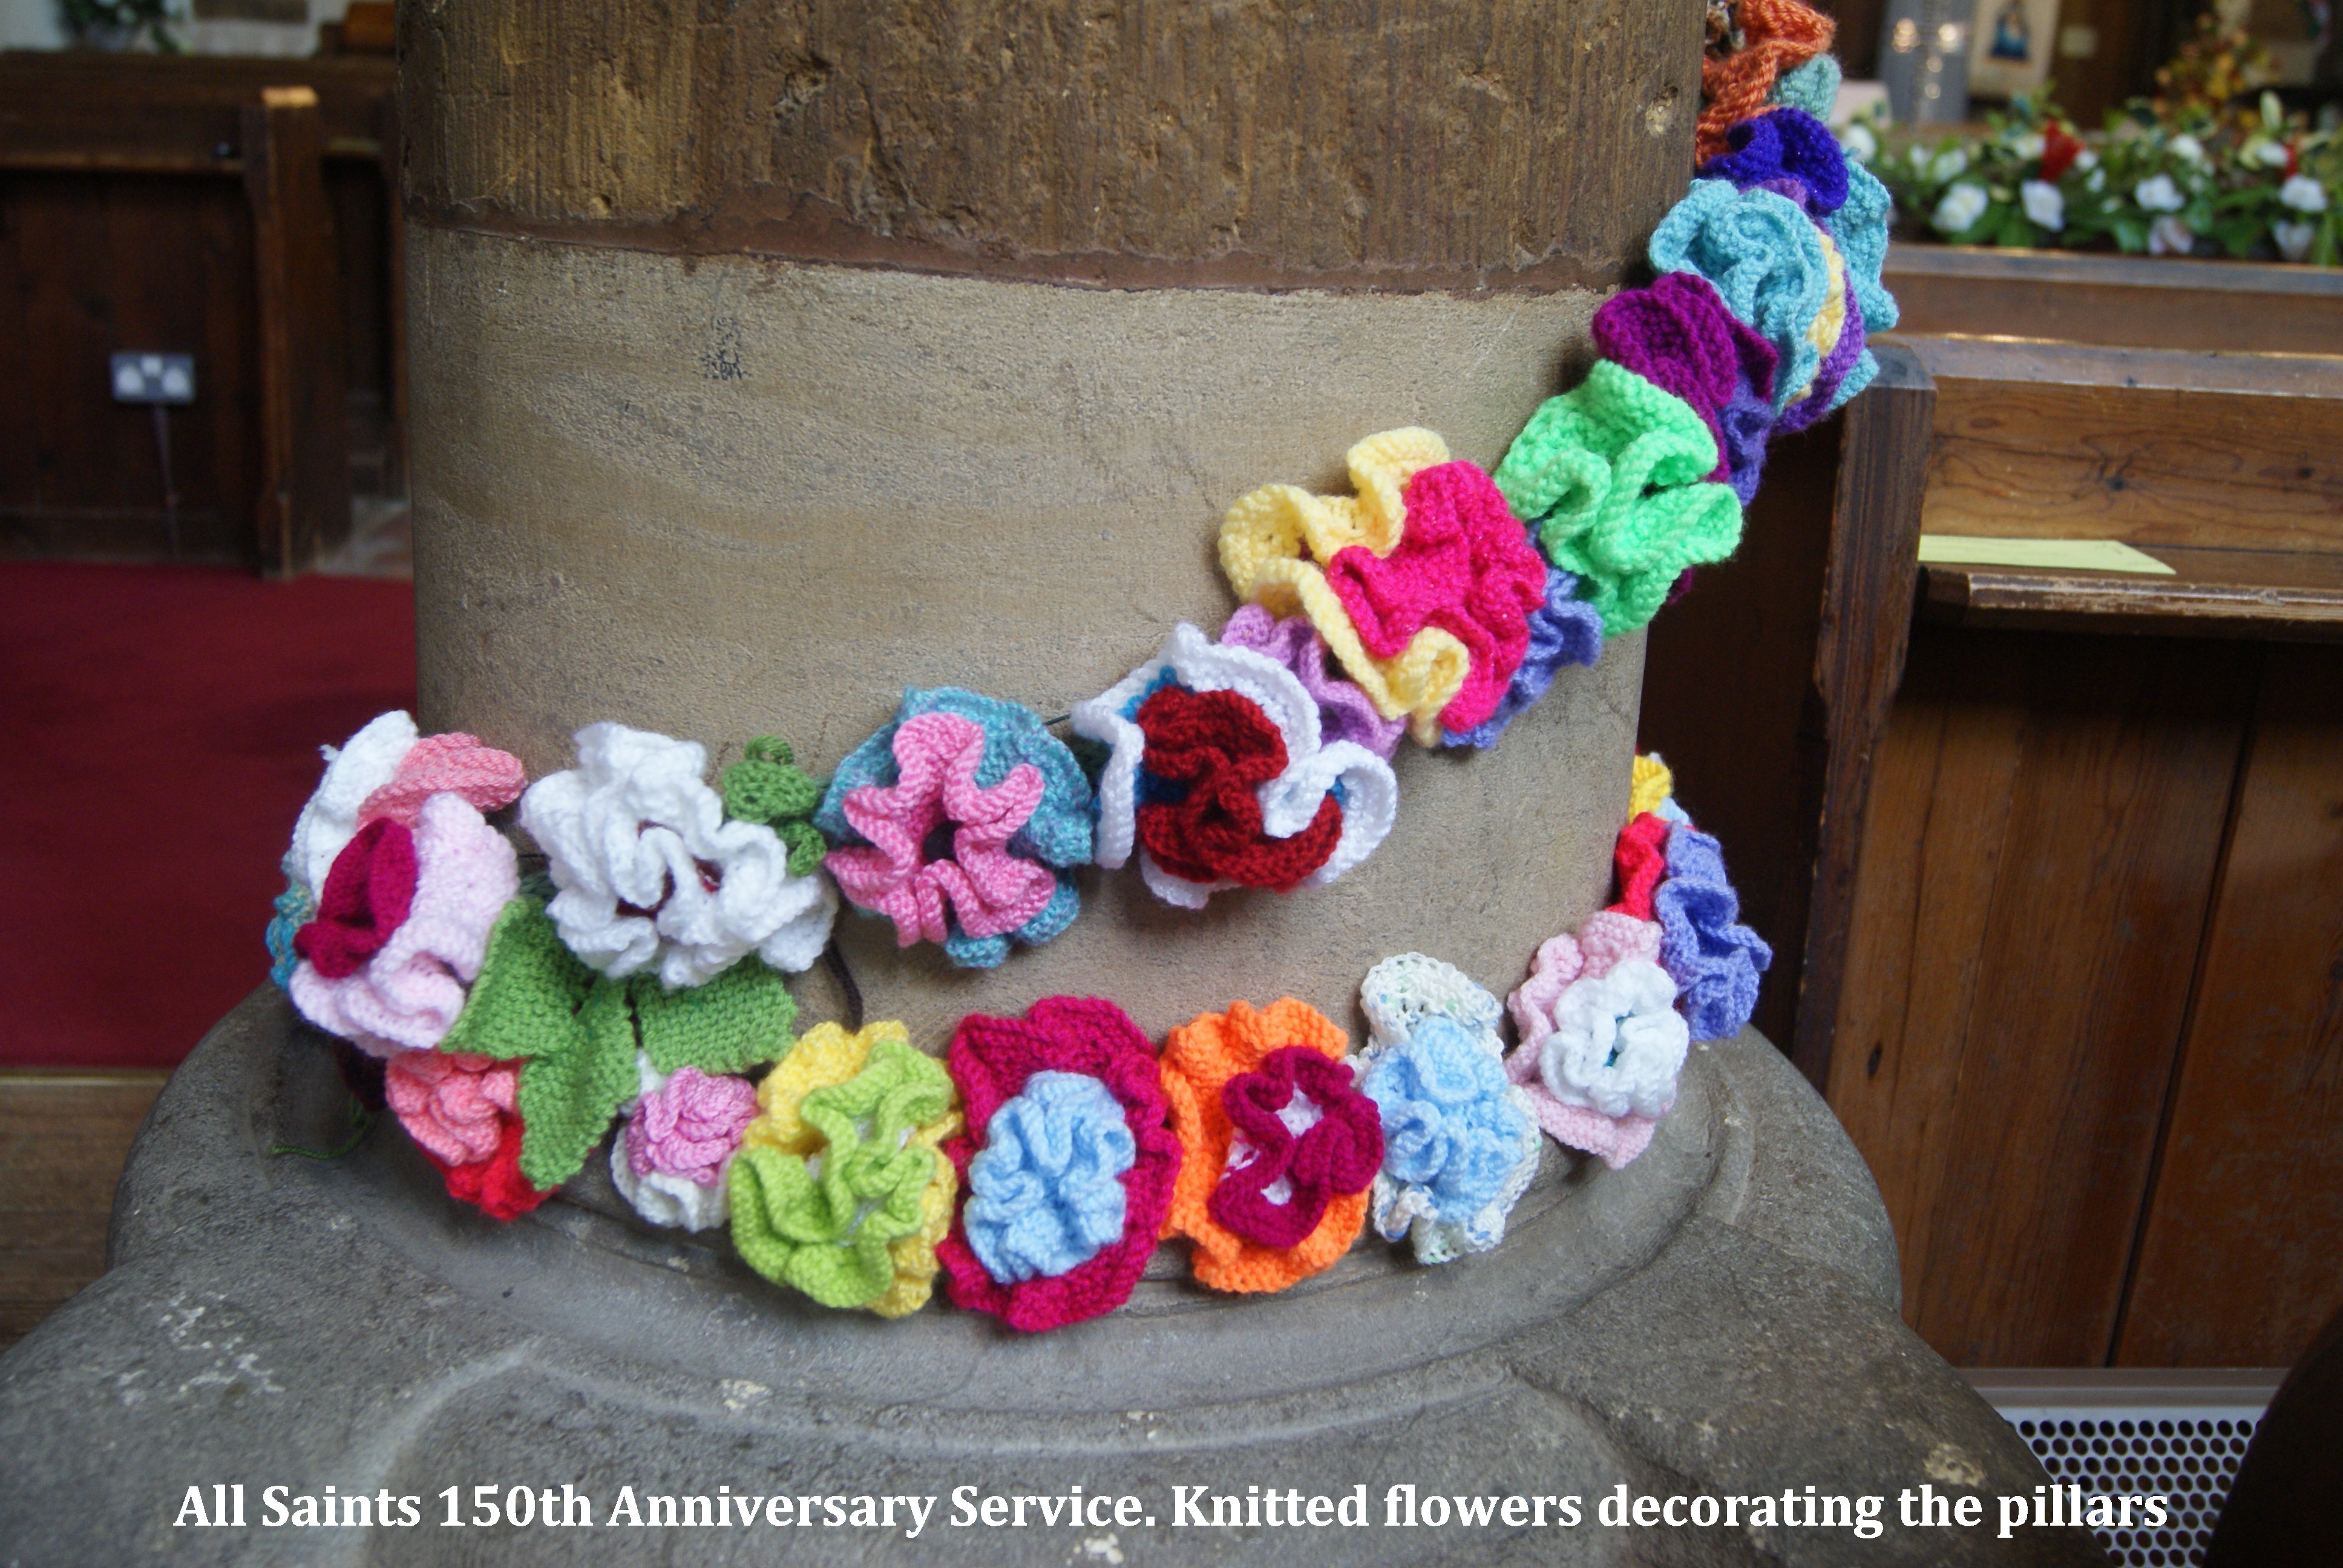 (002) Knitted flowers decorating the pillars